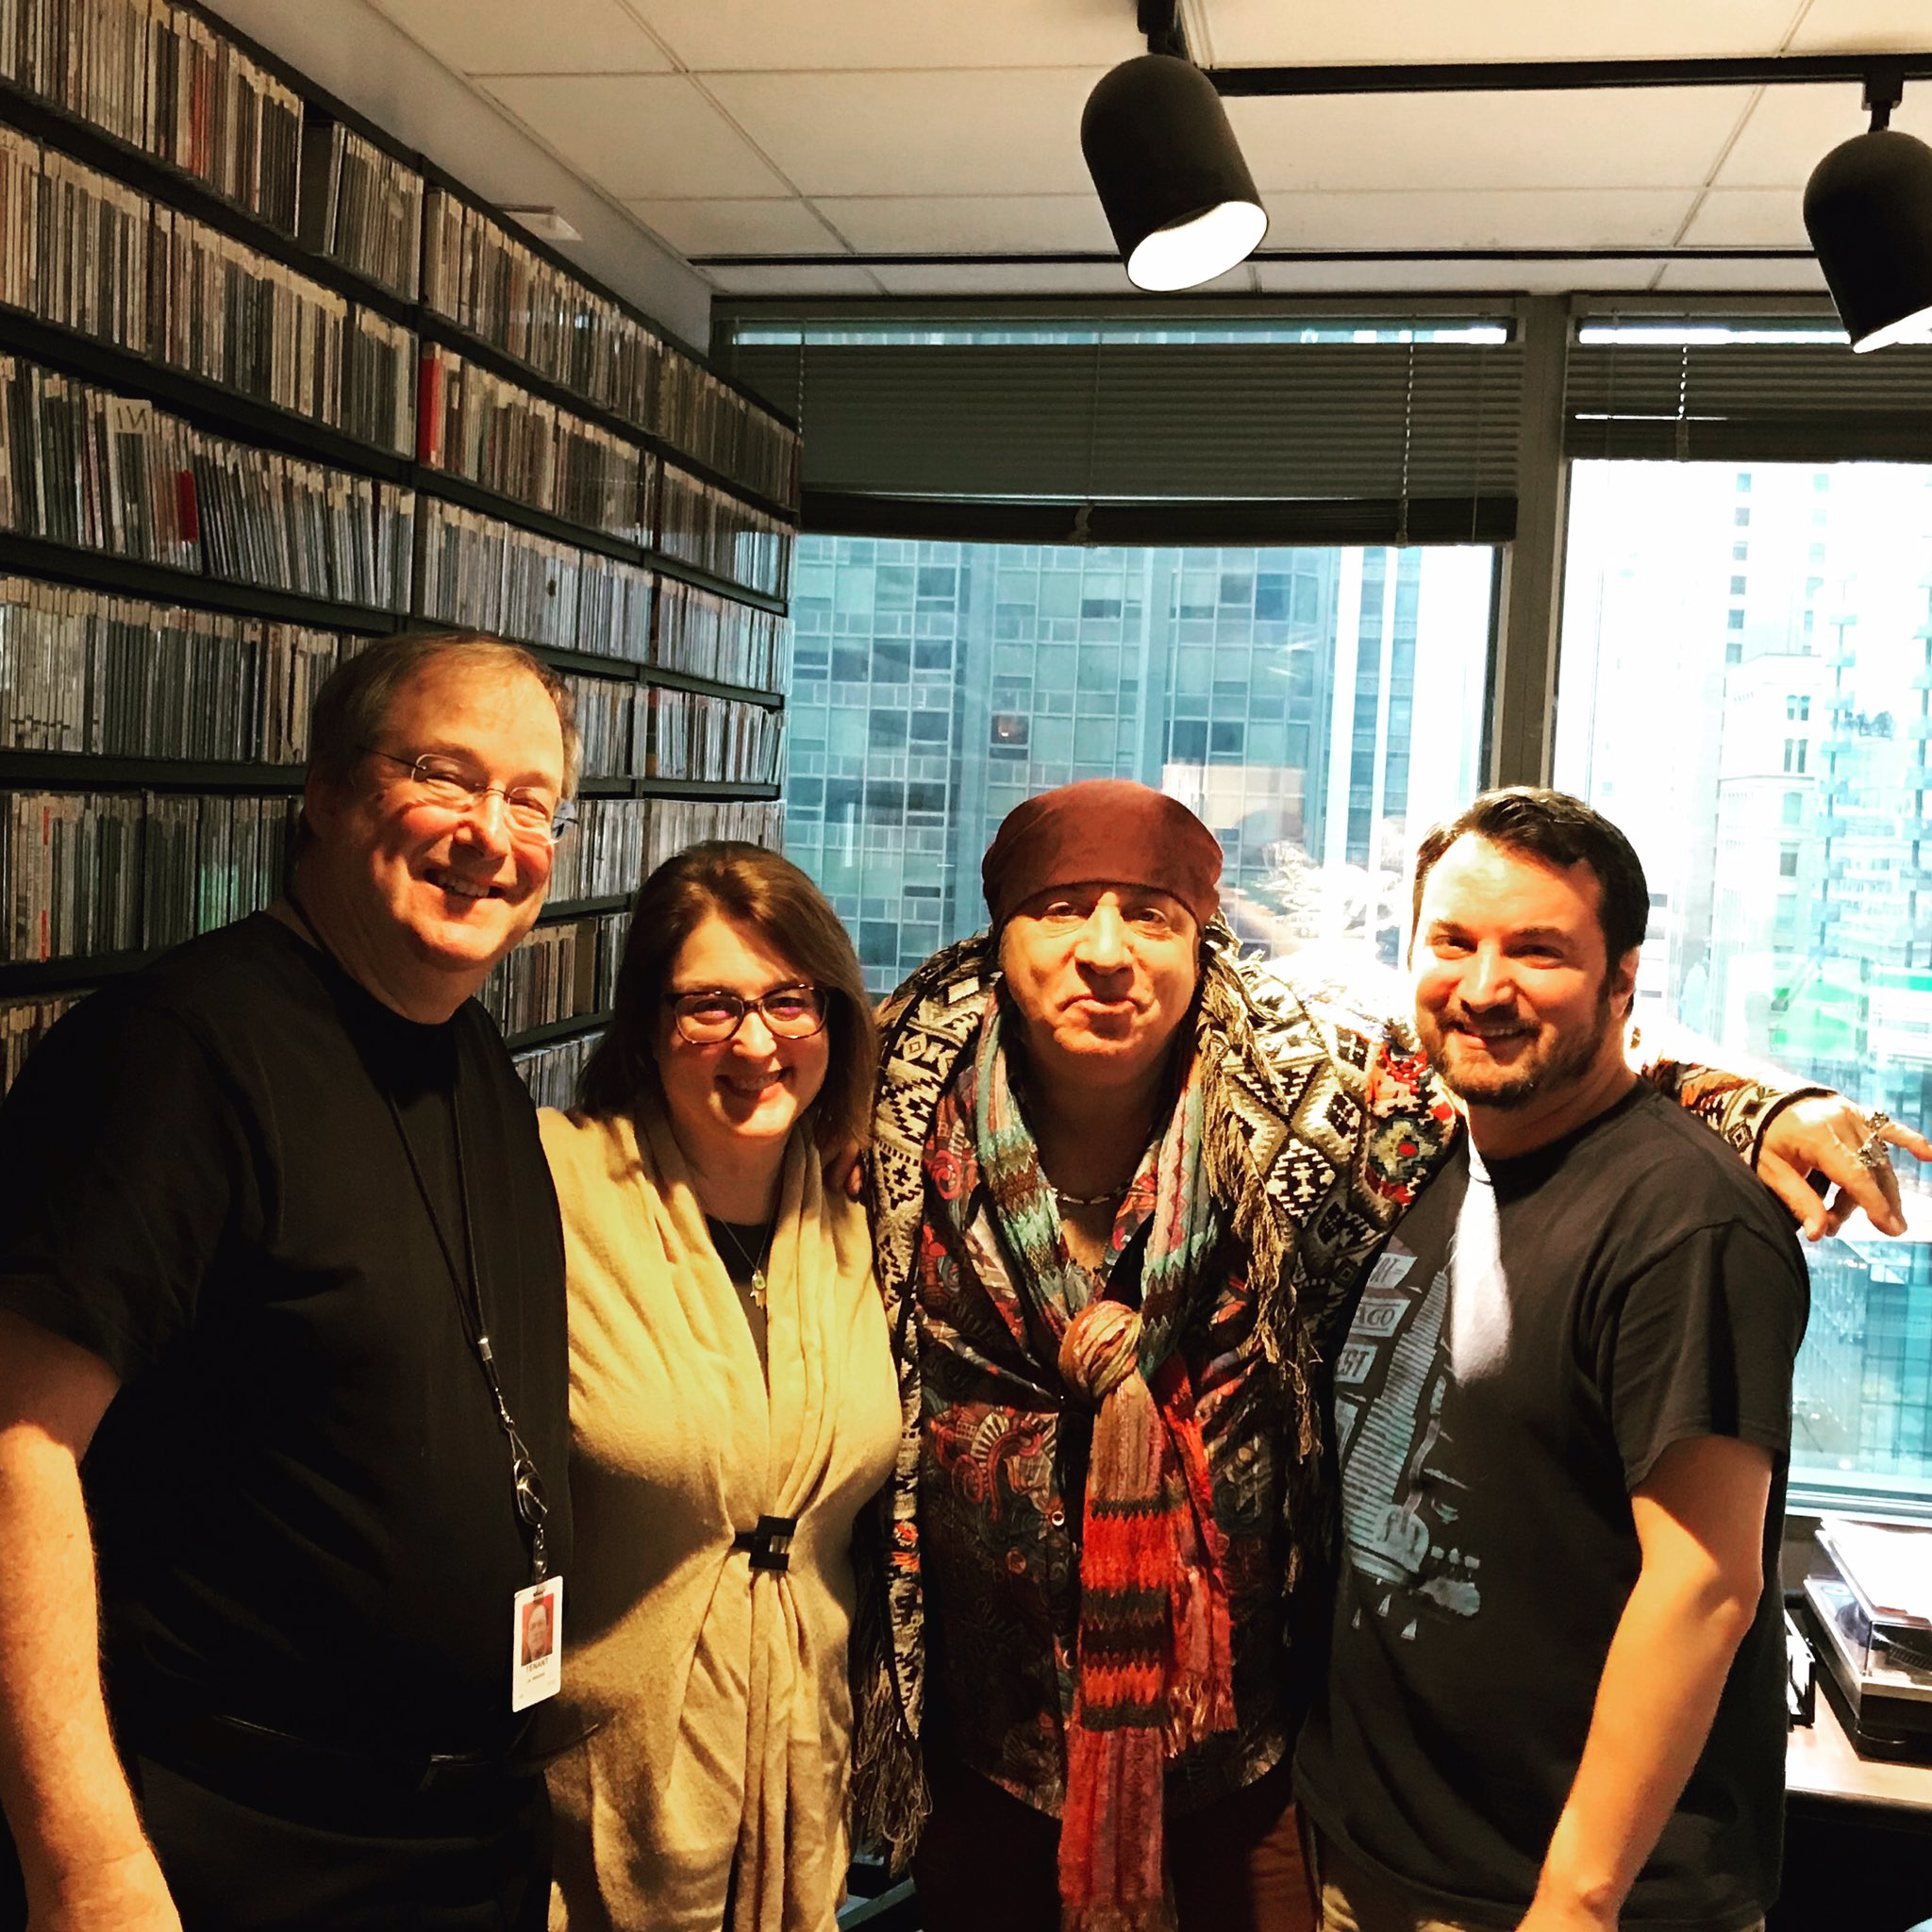 Little Steven Van Zandt Joins the XRT Morning Show Ahead of His Holiday Concert for the Kids